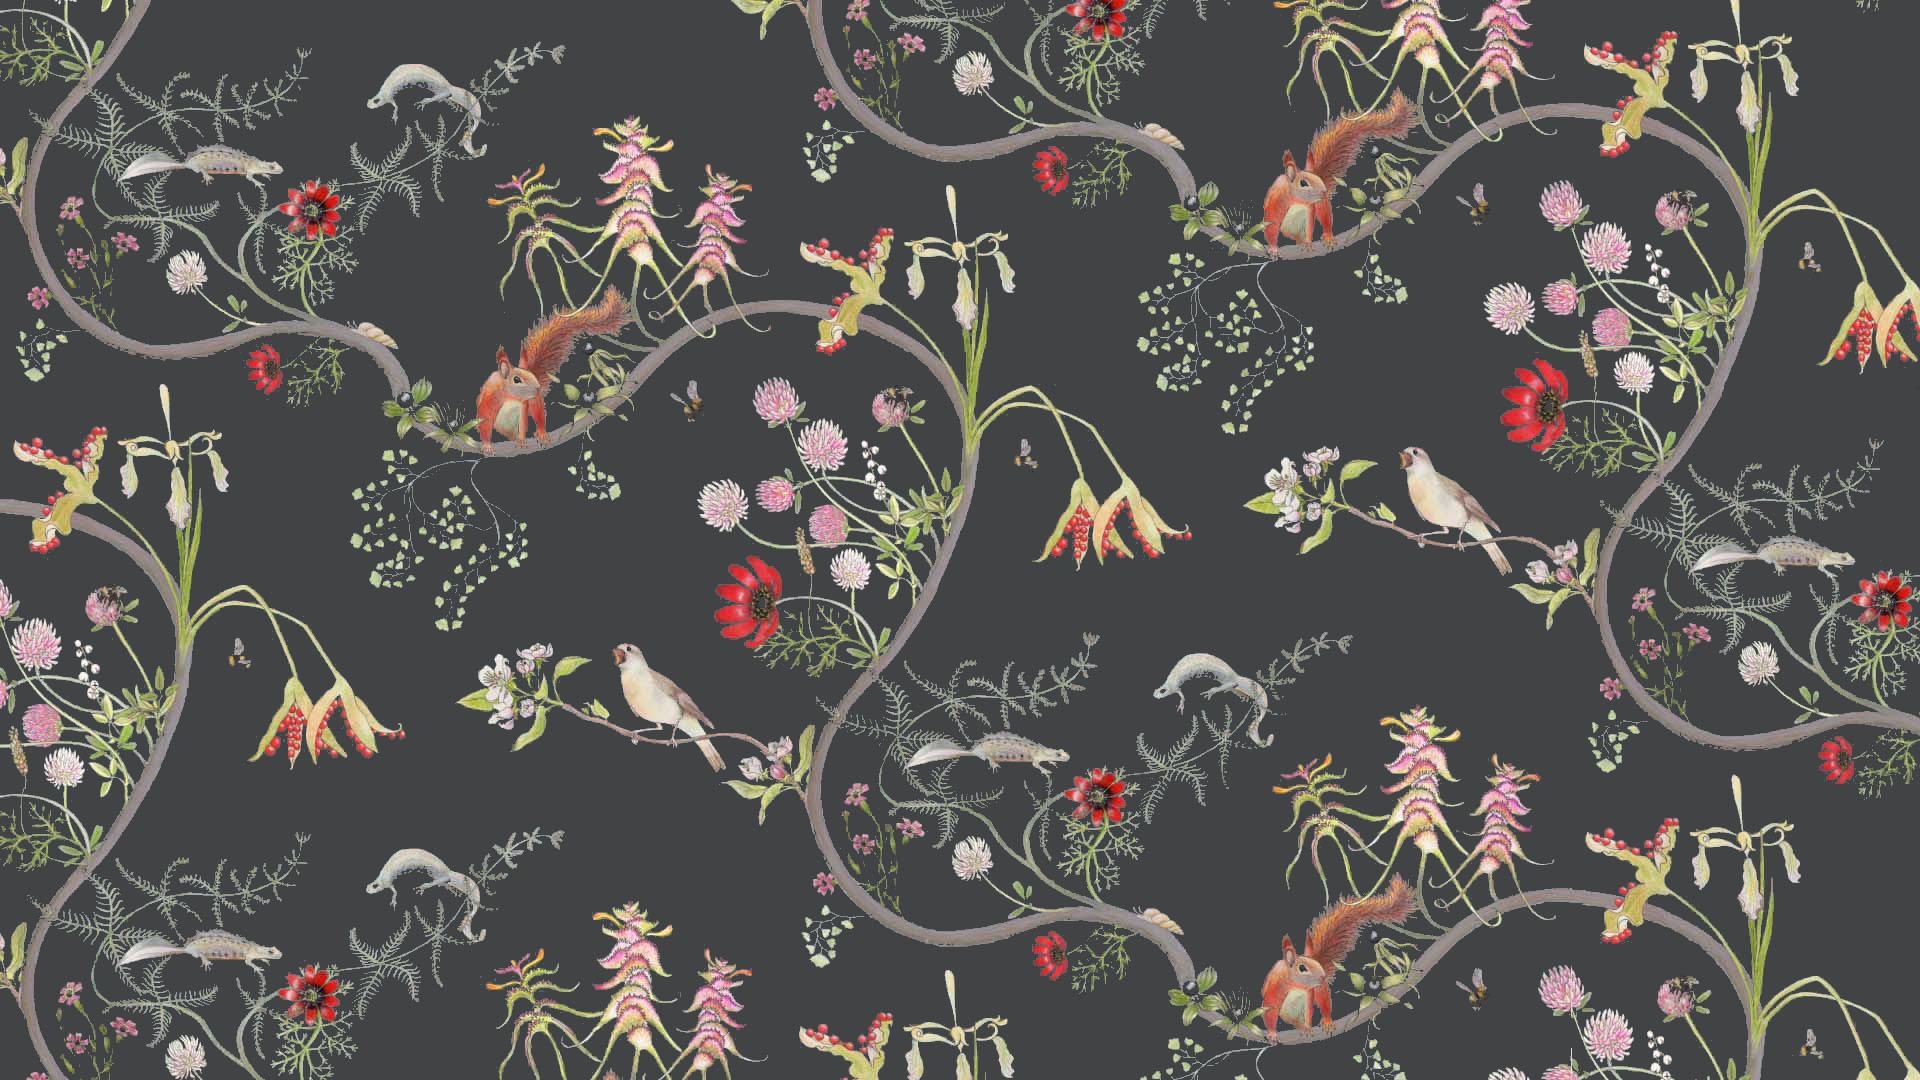 English Mercia Vines Slate Botanical Birds and Bees Wallpaper For Sale